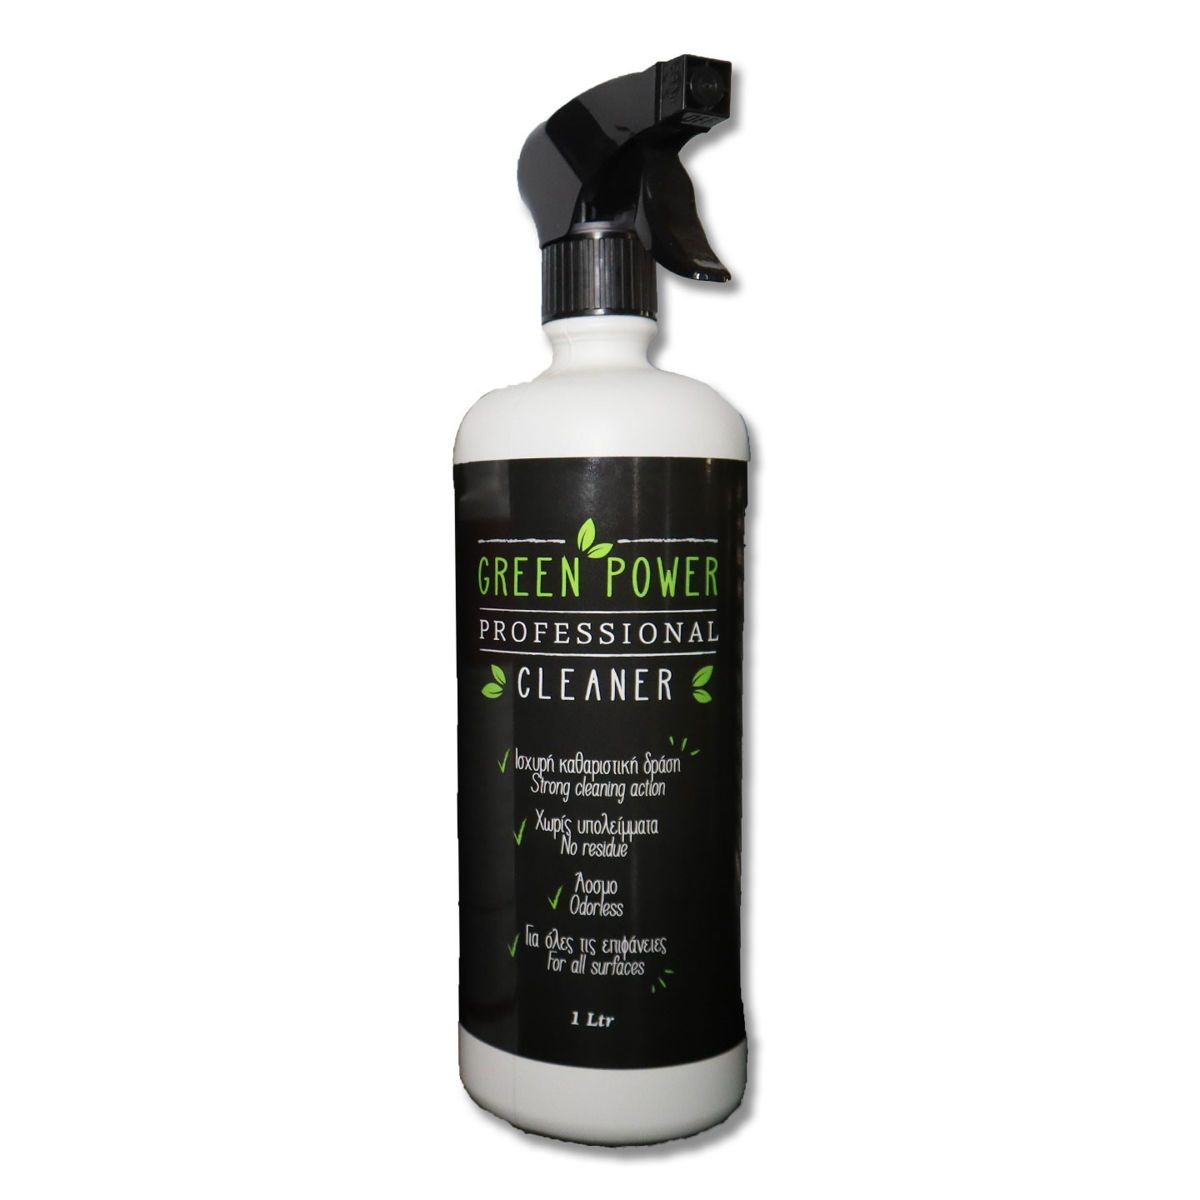 Green Power Professional Cleaner